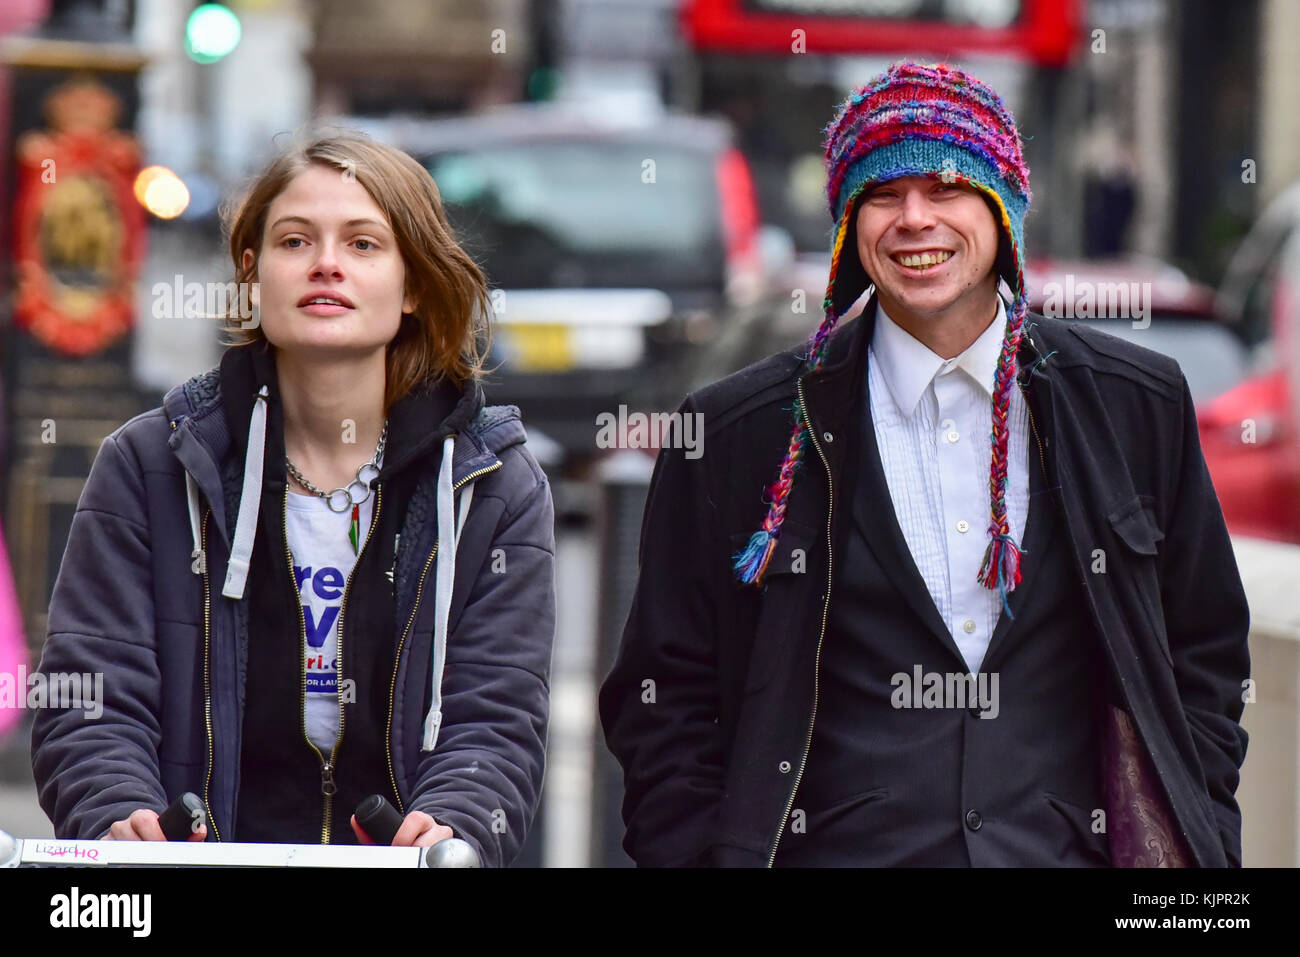 London, United Kingdom. 29 November 2017. Lauri Love and partner Sylvia Mann arrive at the Royal Courts of Justice in central London for the start of an appeal hearing against his extradition to the US where he faces hackng charges. Credit: Peter Manning/Alamy Live News Stock Photo